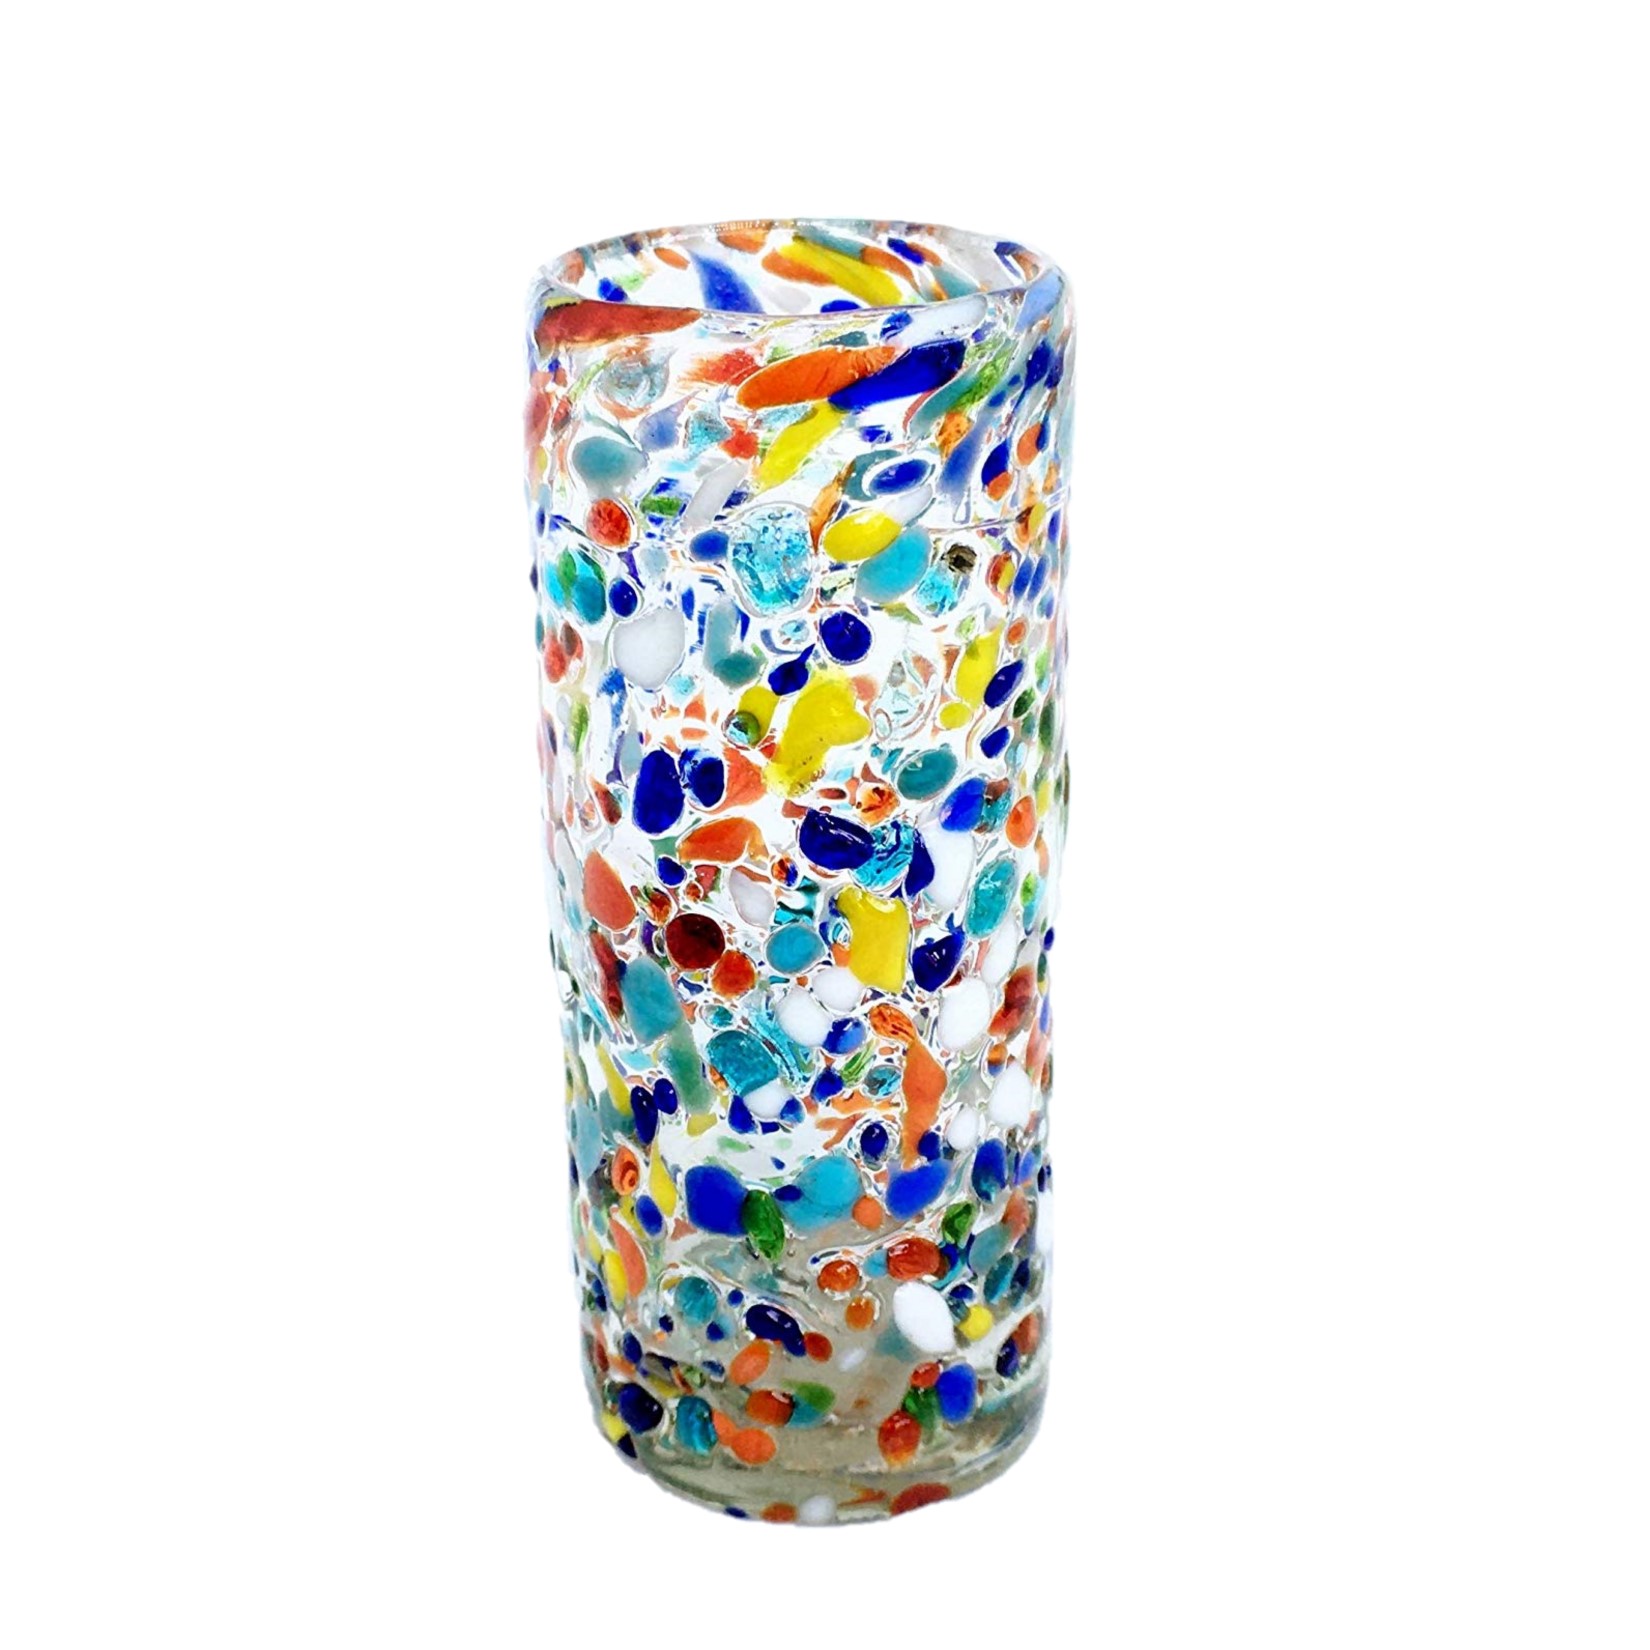 Wholesale MEXICAN GLASSWARE / Confetti Rocks 2 oz Tequila Shot Glasses  / Sip your favorite Tequila or Mezcal with these iconic Confetti Rocks shot glasses, which are a must-have of any bar. Crafted one by one by skilled artisans in Tonala, Mexico, each glass is different from the next making them unique works of art. They feature our colorful Confetti rocks design with small colored-glass rounded cristals embedded in clear glass that give them a nice feeling and grip. These shot glasses are festive and fun, making them a perfect gift for anyone. Get ready for your next fiesta!!